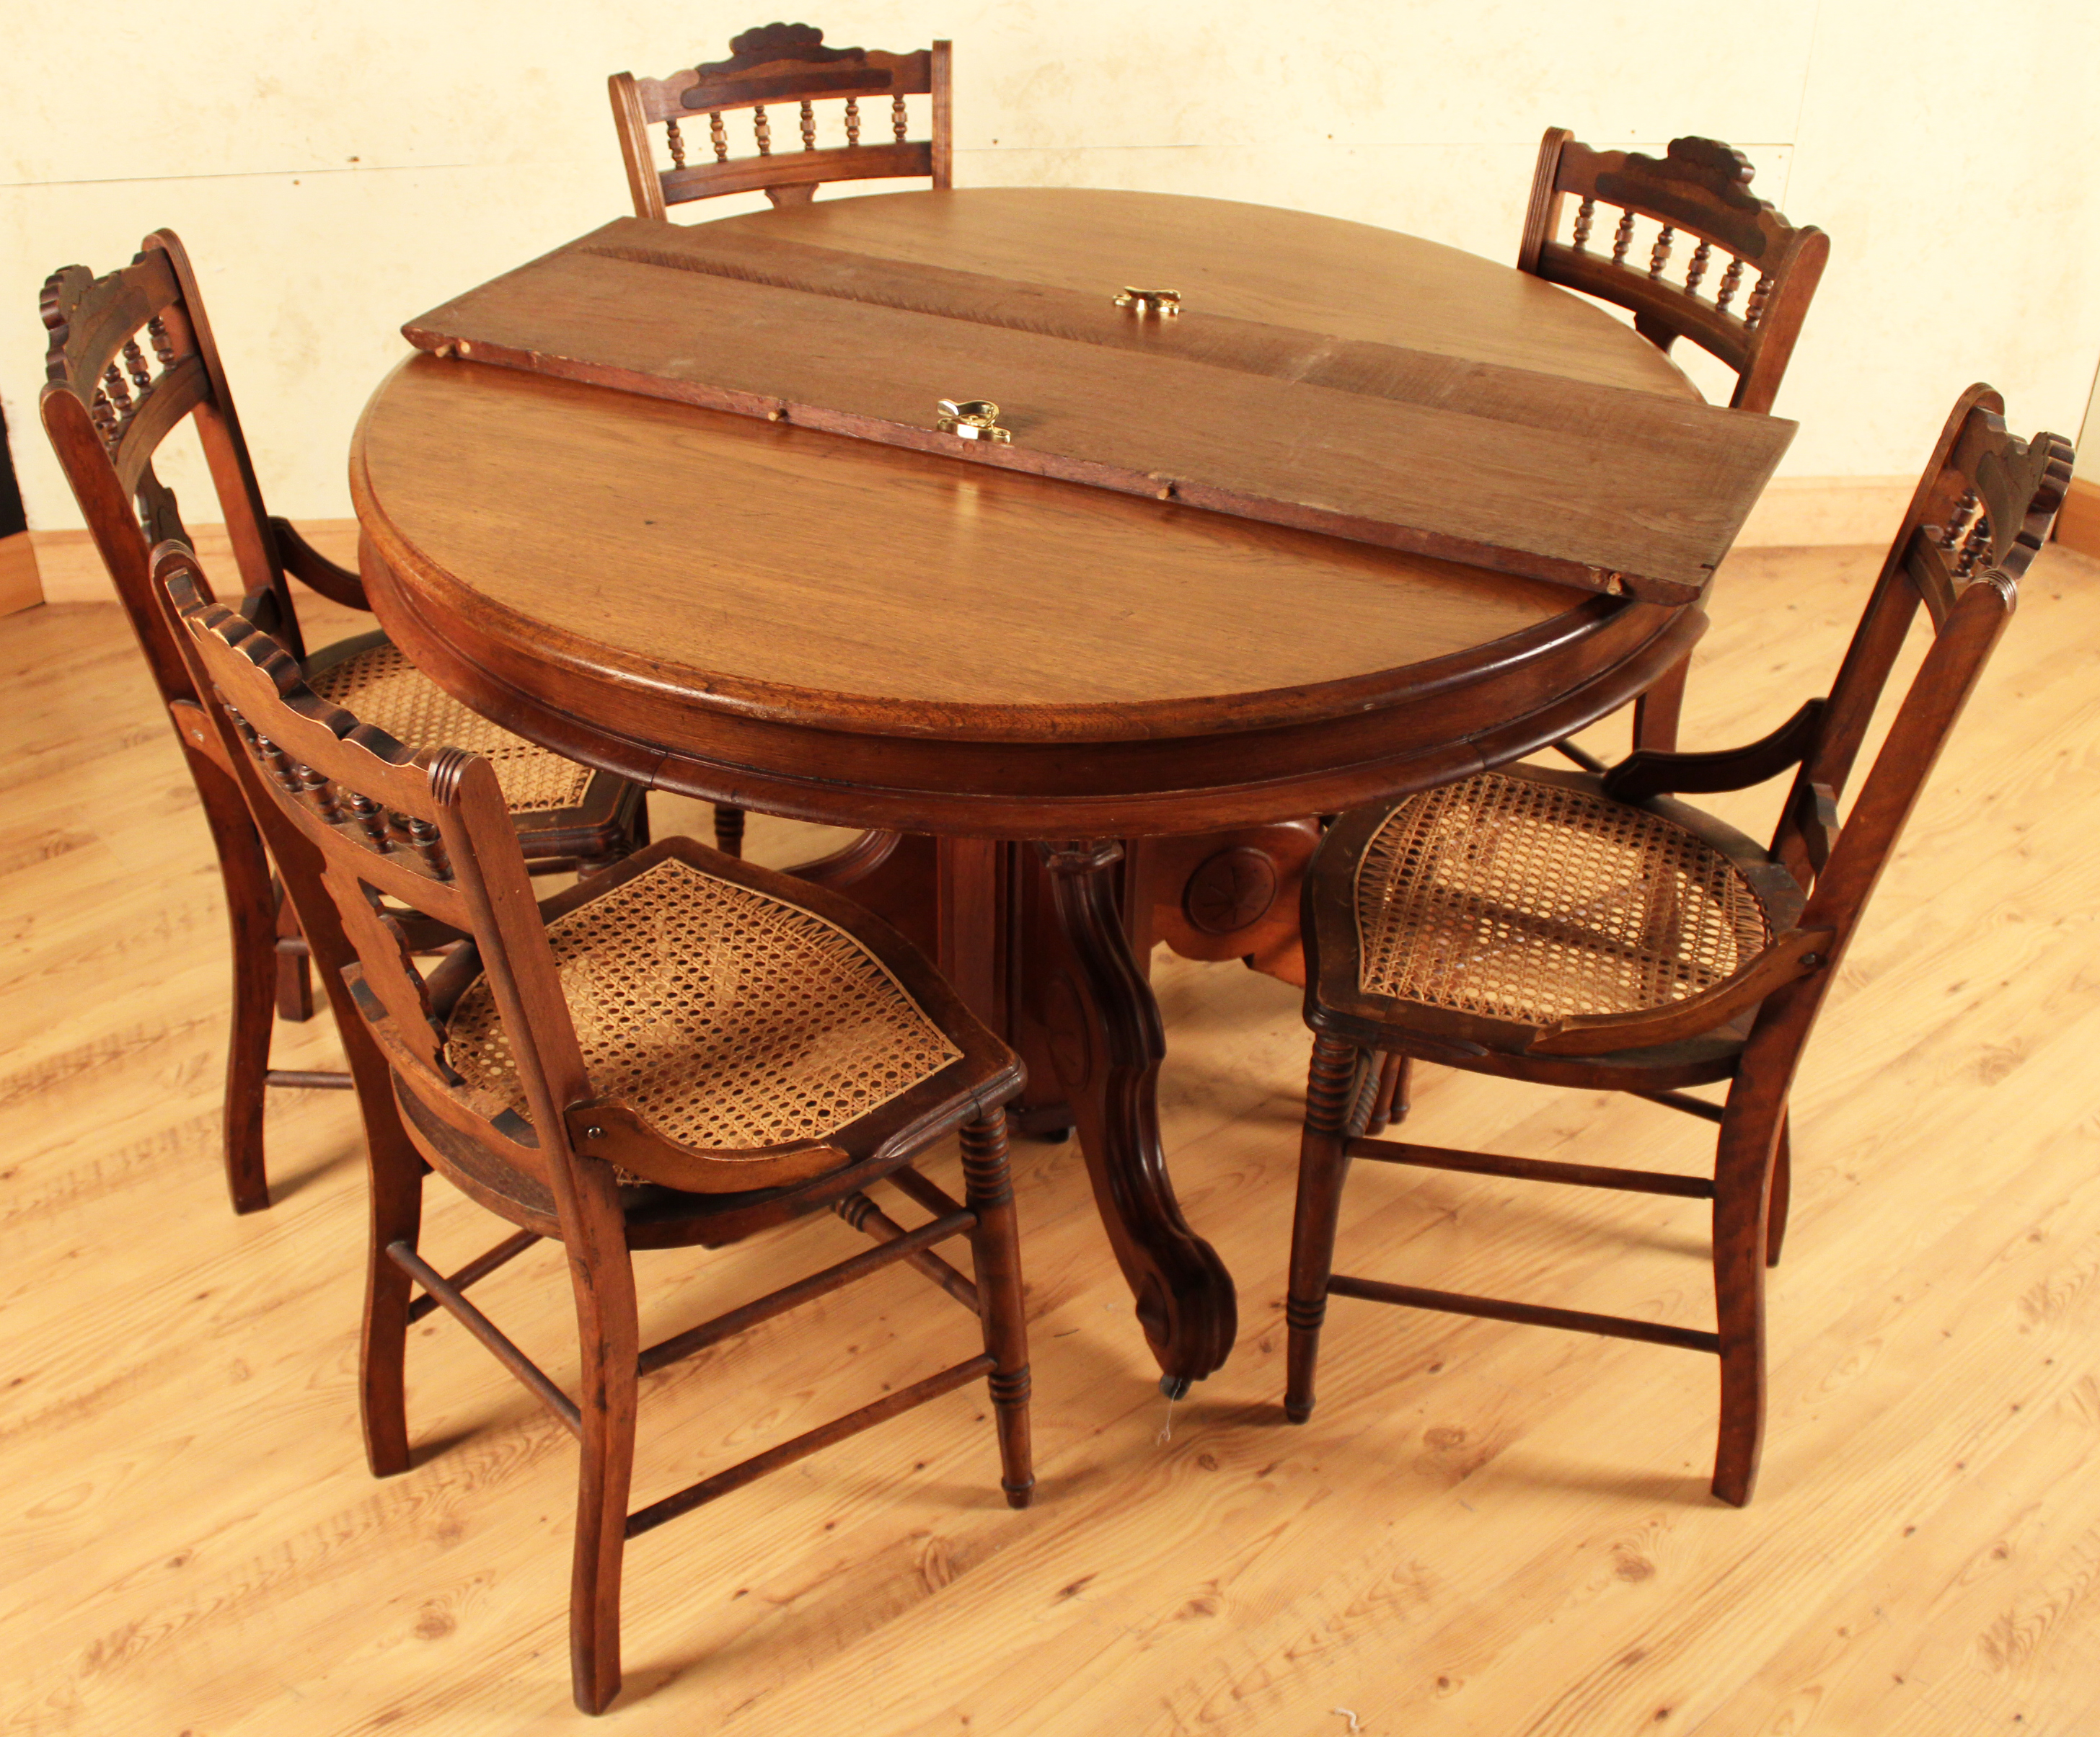 VICTORIAN WALNUT TABLE WITH 5 CHAIRS 35f1e5